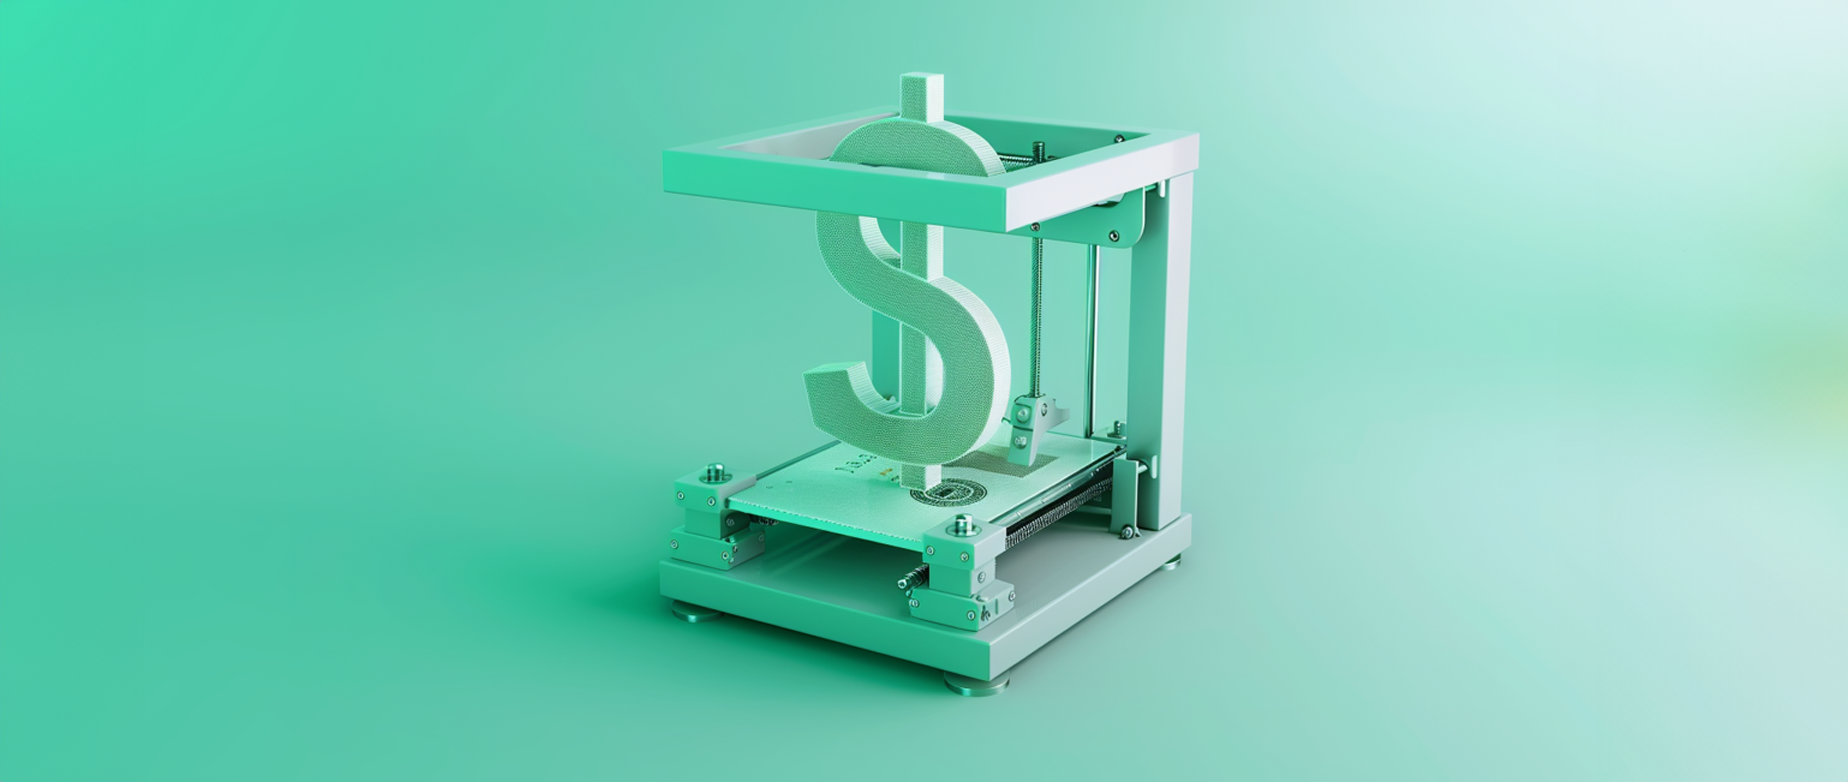 A 3D printer printing a dollar sign on a mint green background.